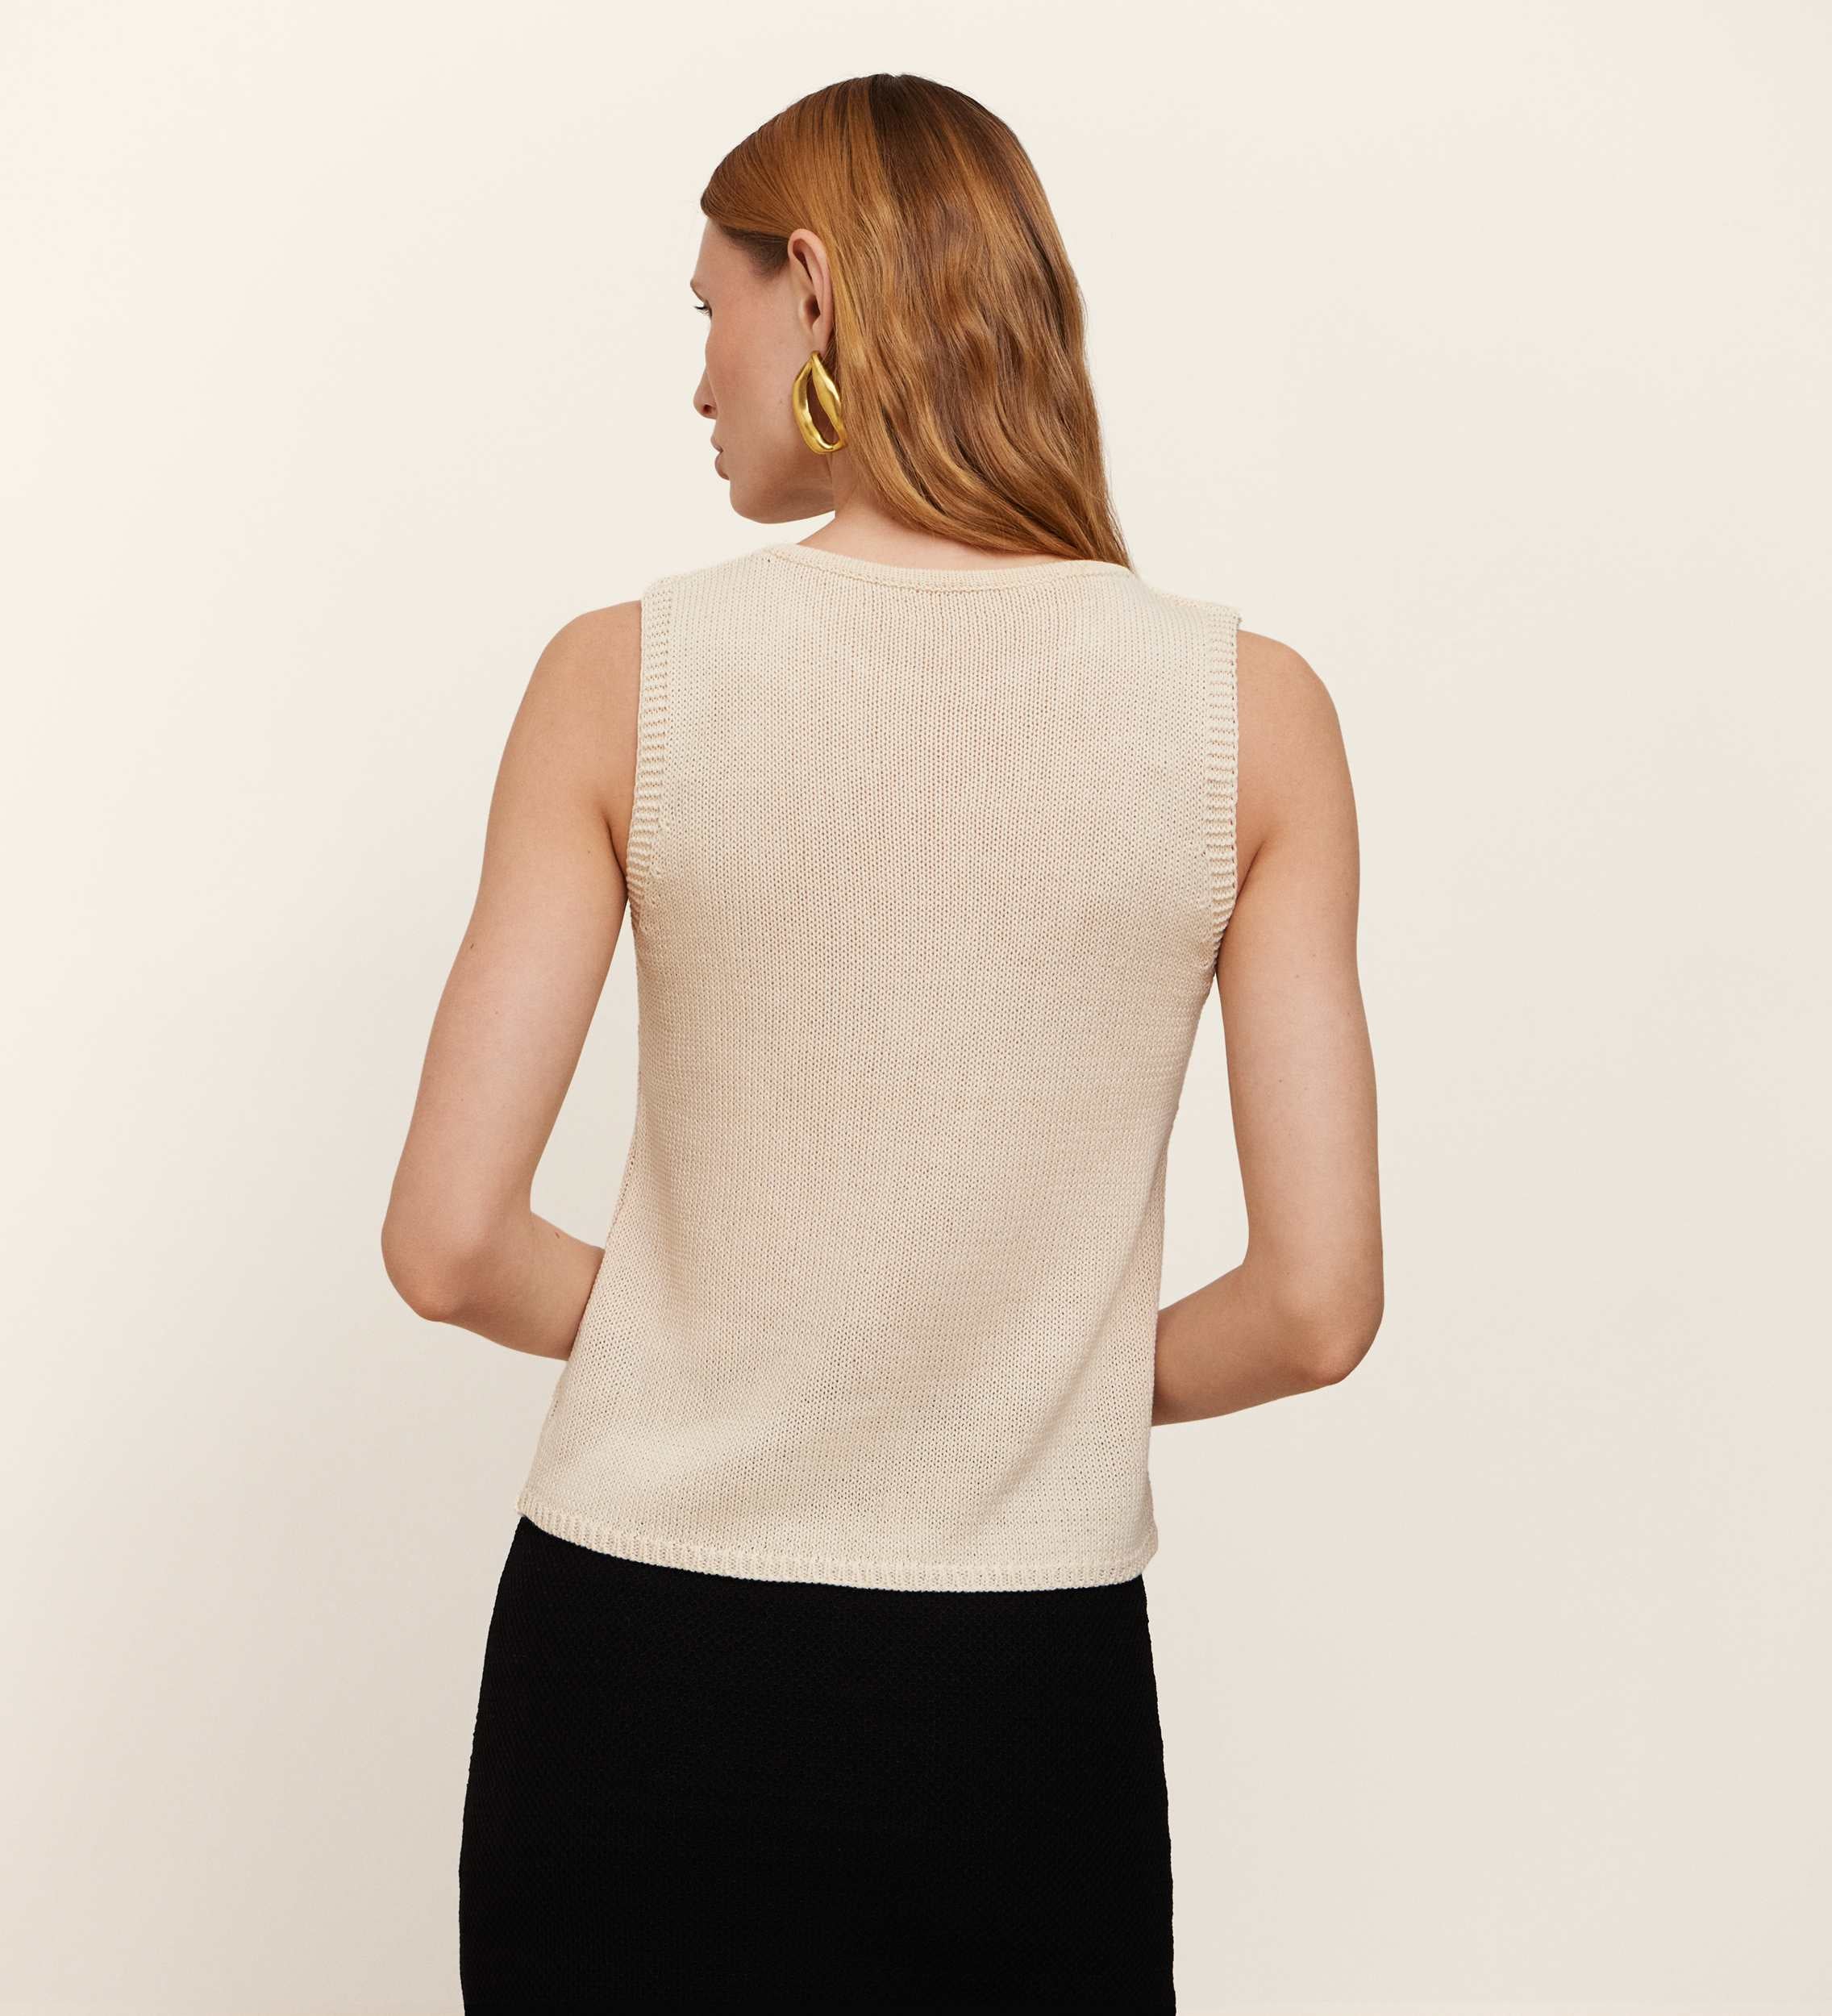 Embroidered tricot top